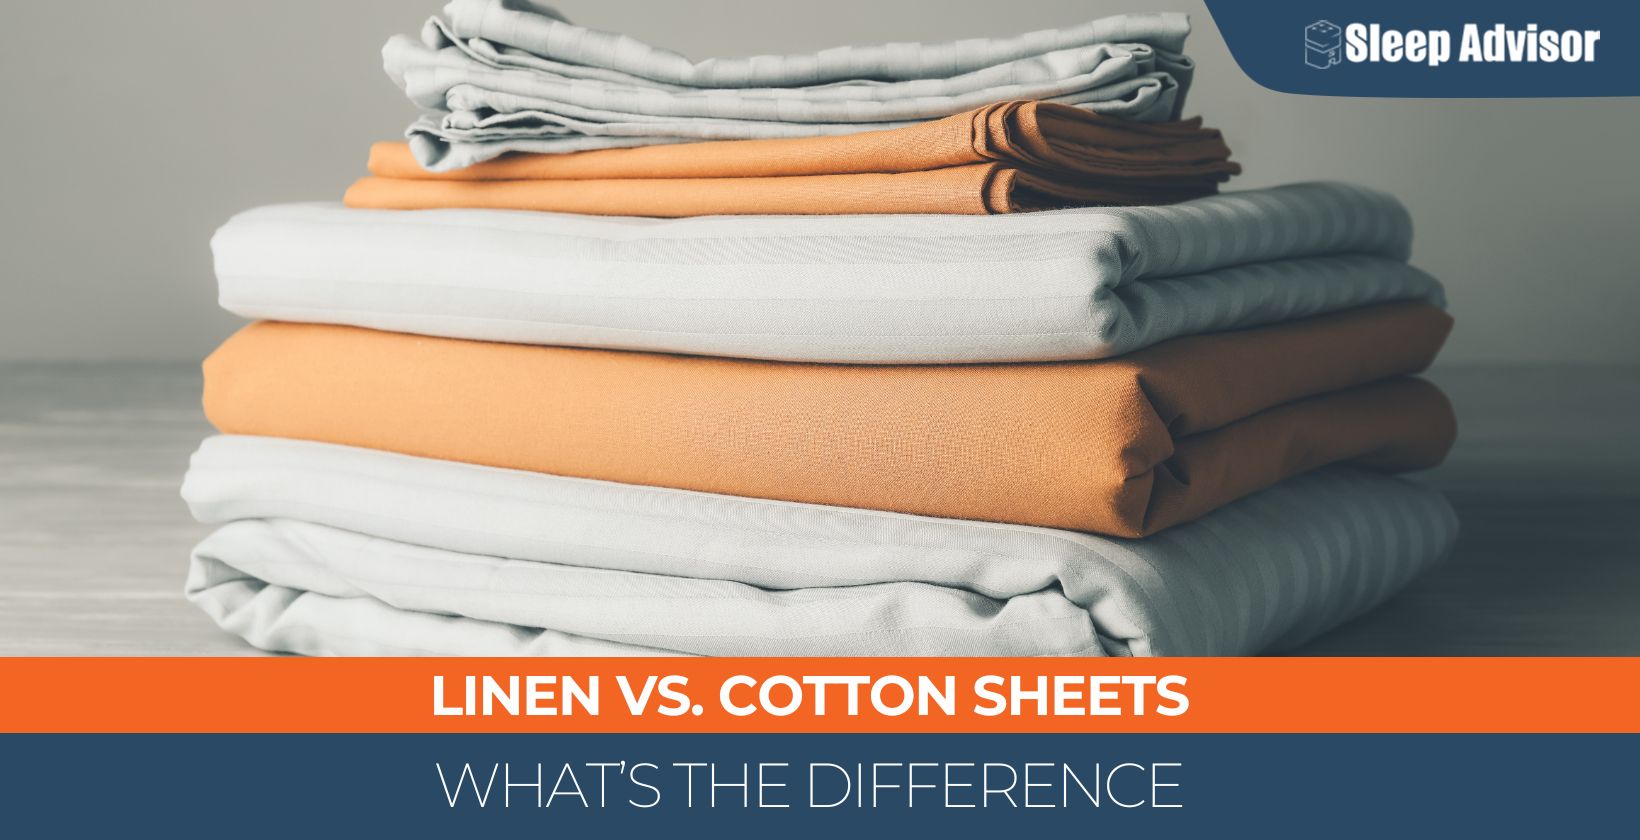 Linen vs. Cotton Sheets: What’s the Difference?